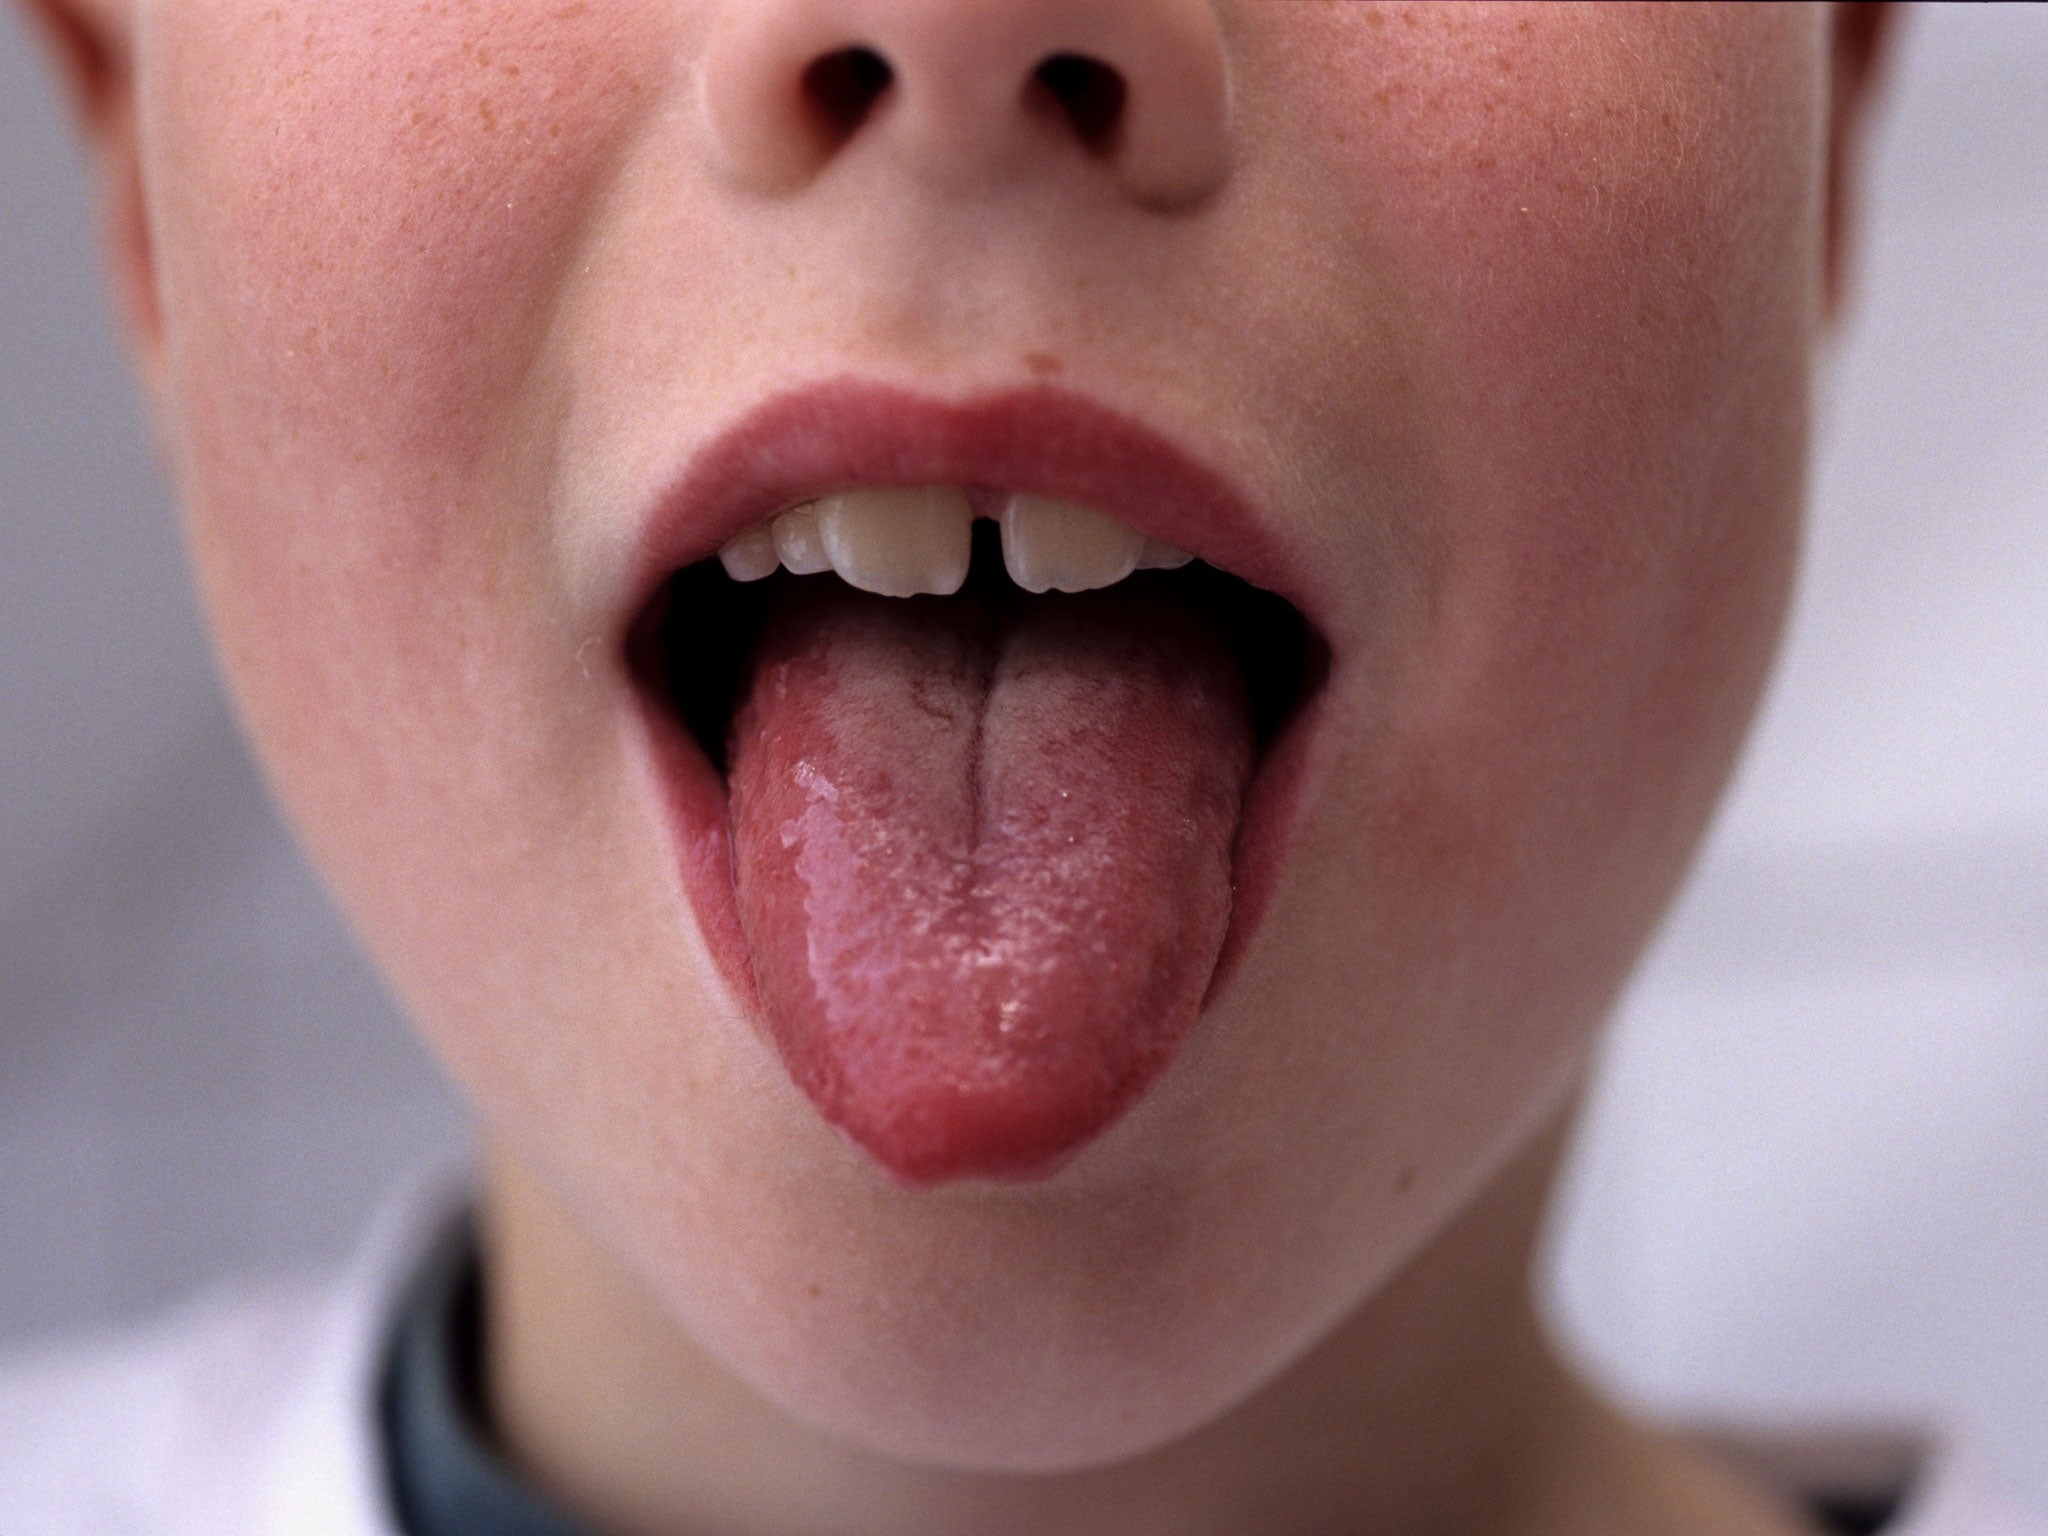 A swollen tongue can be a symptom on top of the pink-red rash